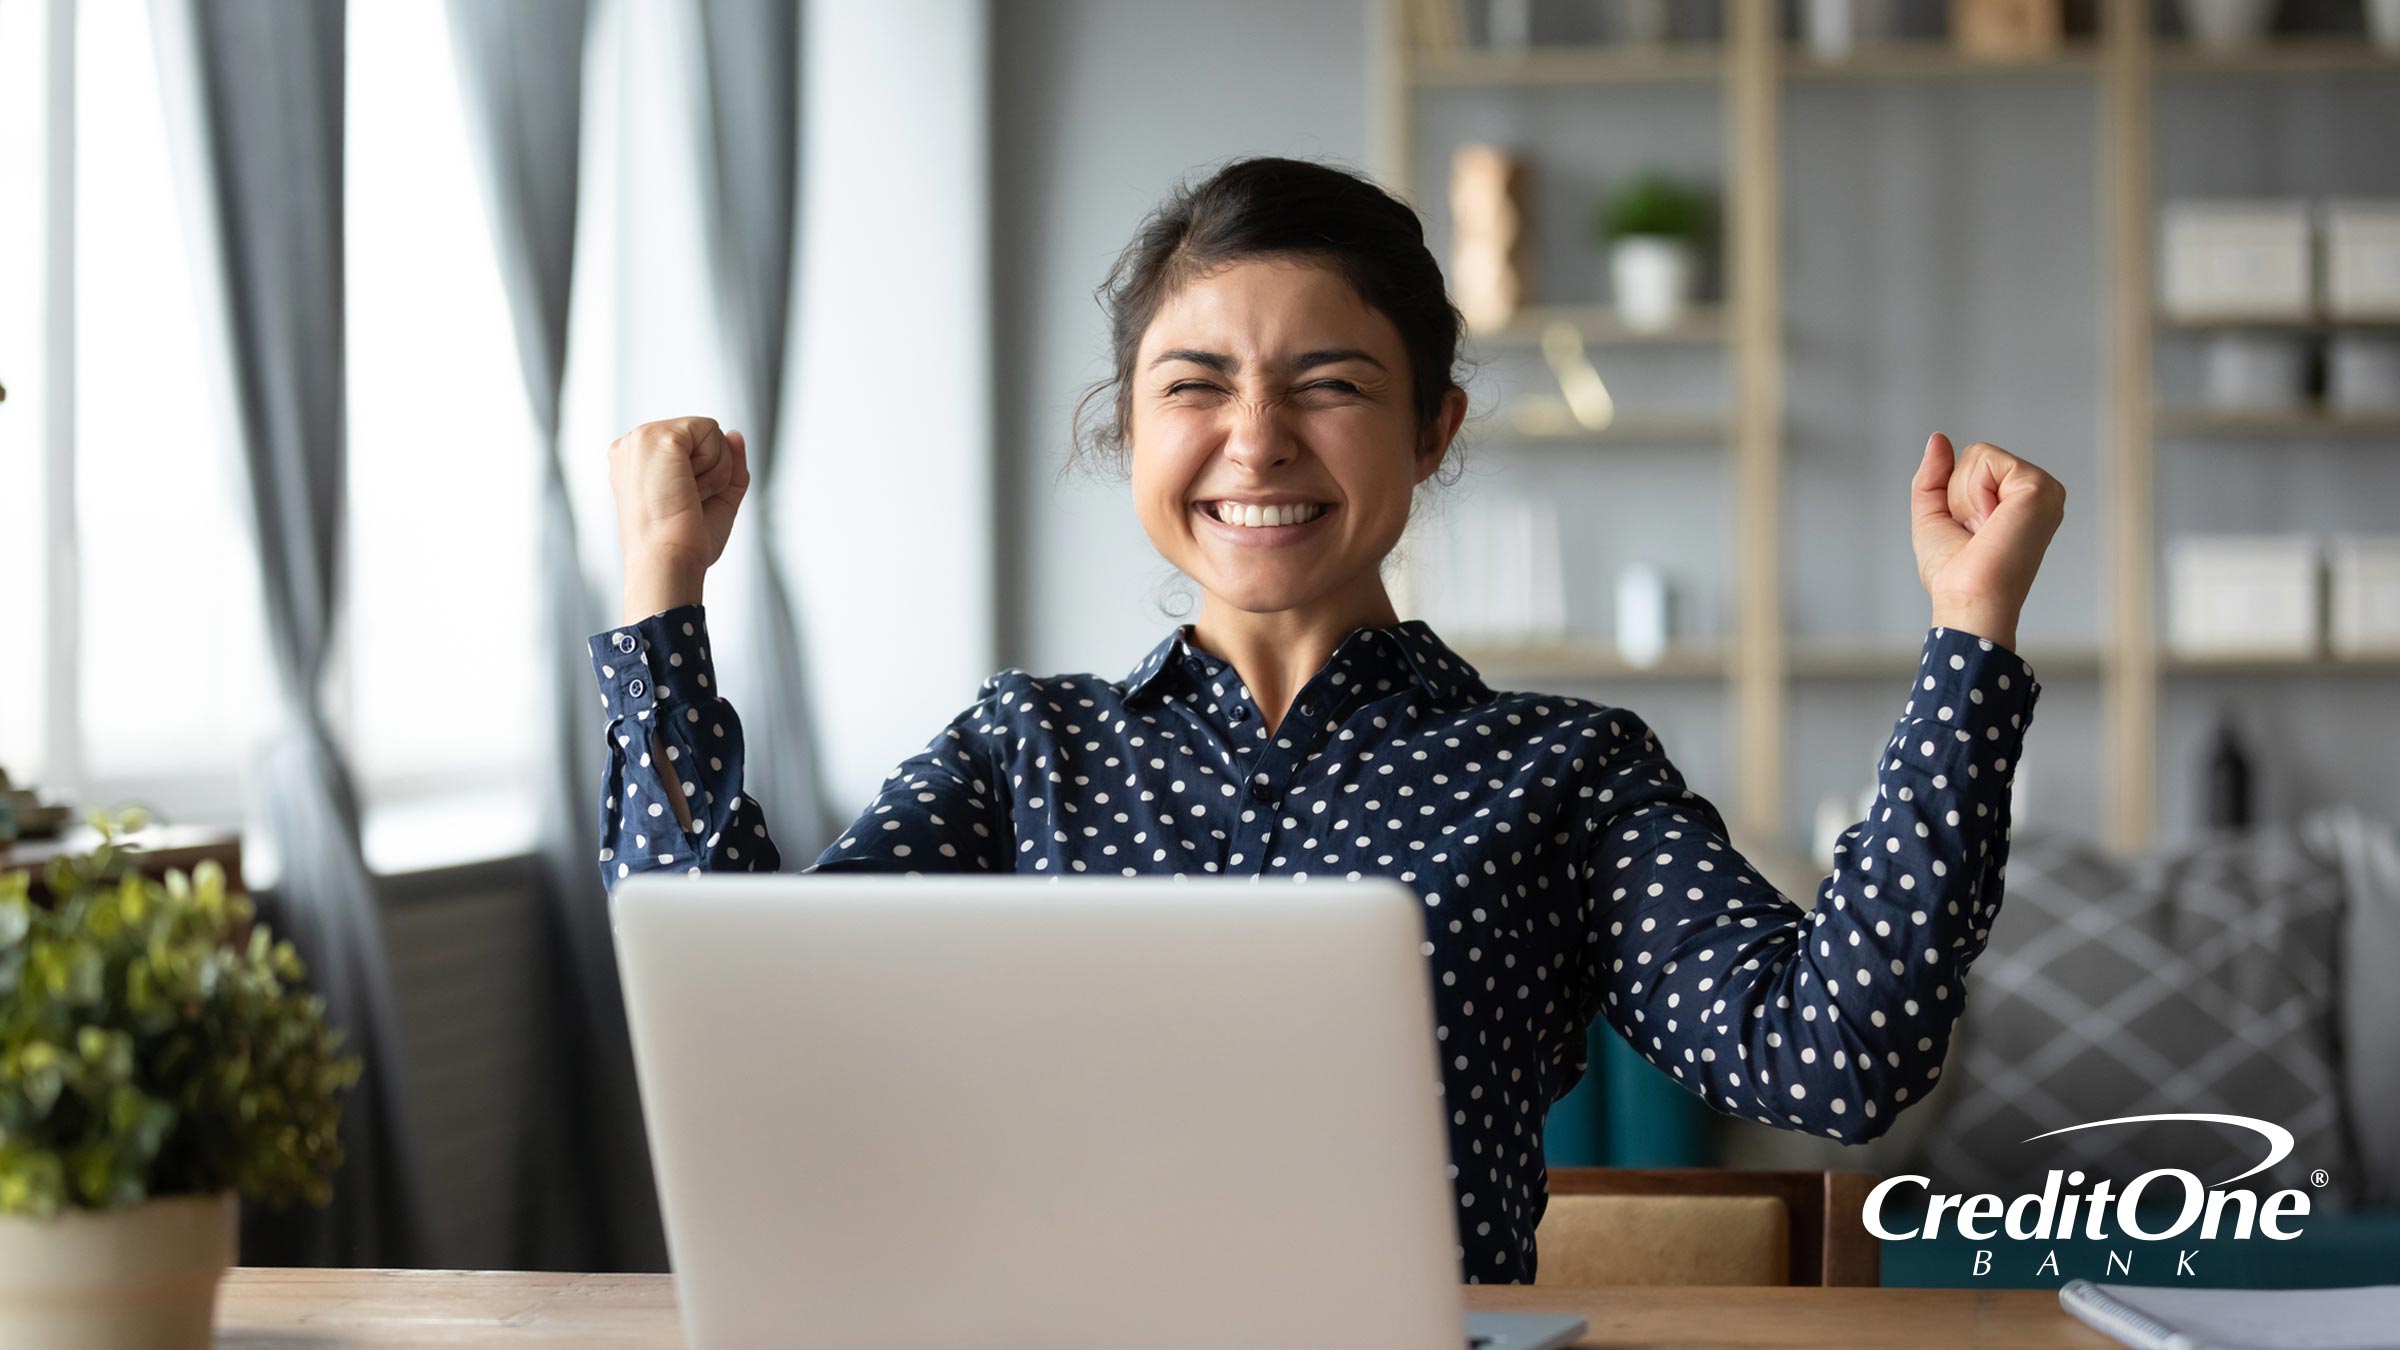 A Woman Celebrating With Her Hands in the Air at Her Laptop